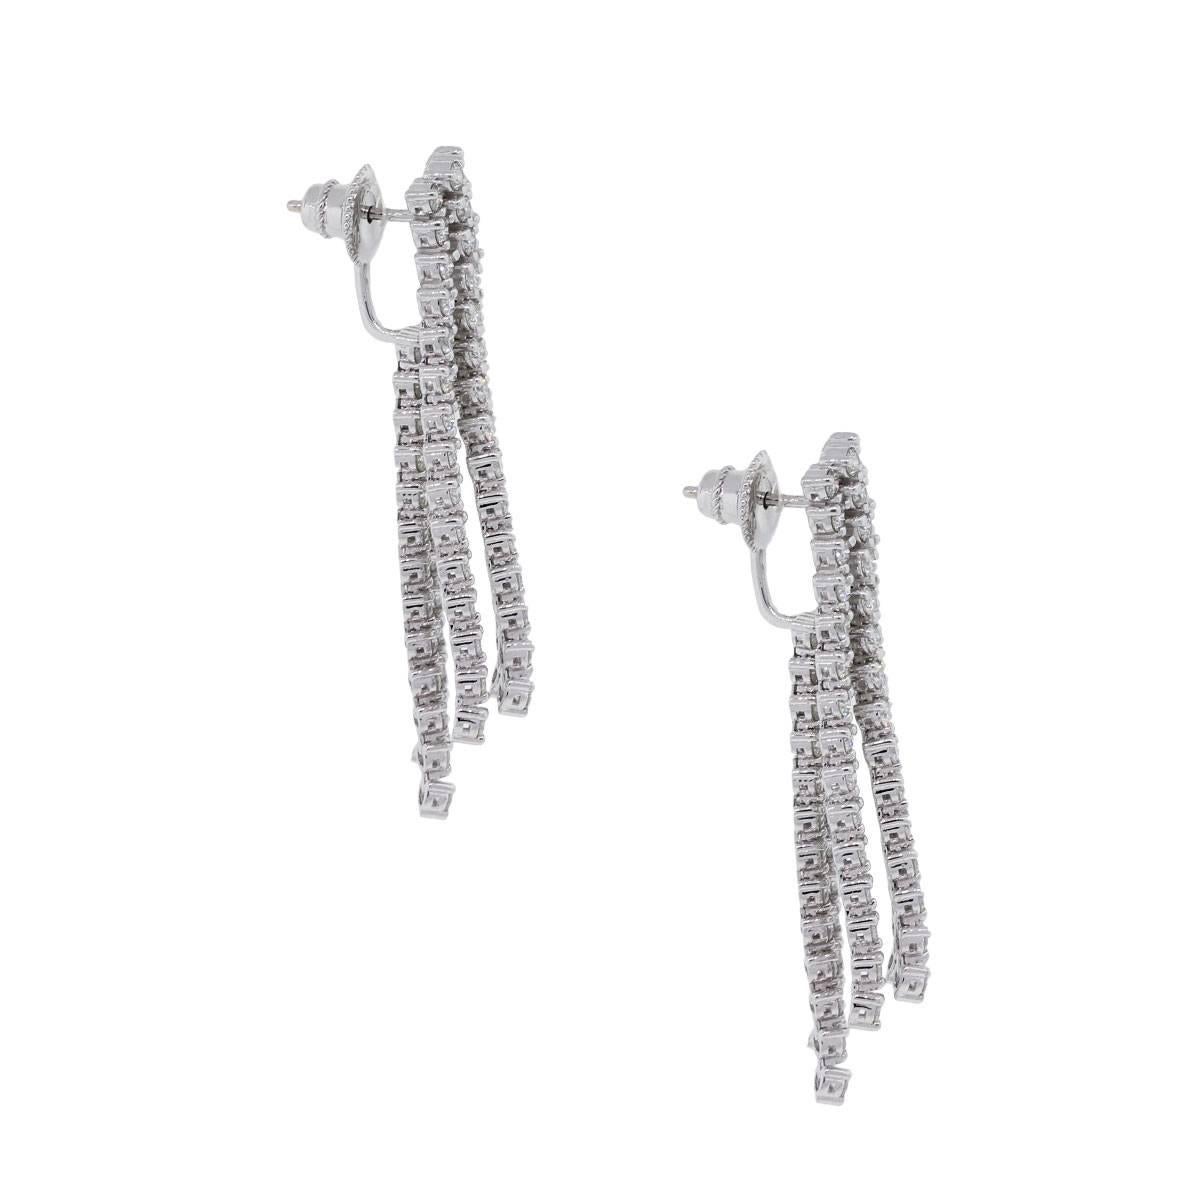 Material: 14k white gold
Diamond Details: Approximately 4.42ctw of round brilliant diamonds. Diamonds are F/G in color and VS in clarity
Earring Measurements: 1.93″ x 0.19″ x 0.33″
Earring Back: Post friction
Total Weight: 15.7g (10dwt)
SKU: